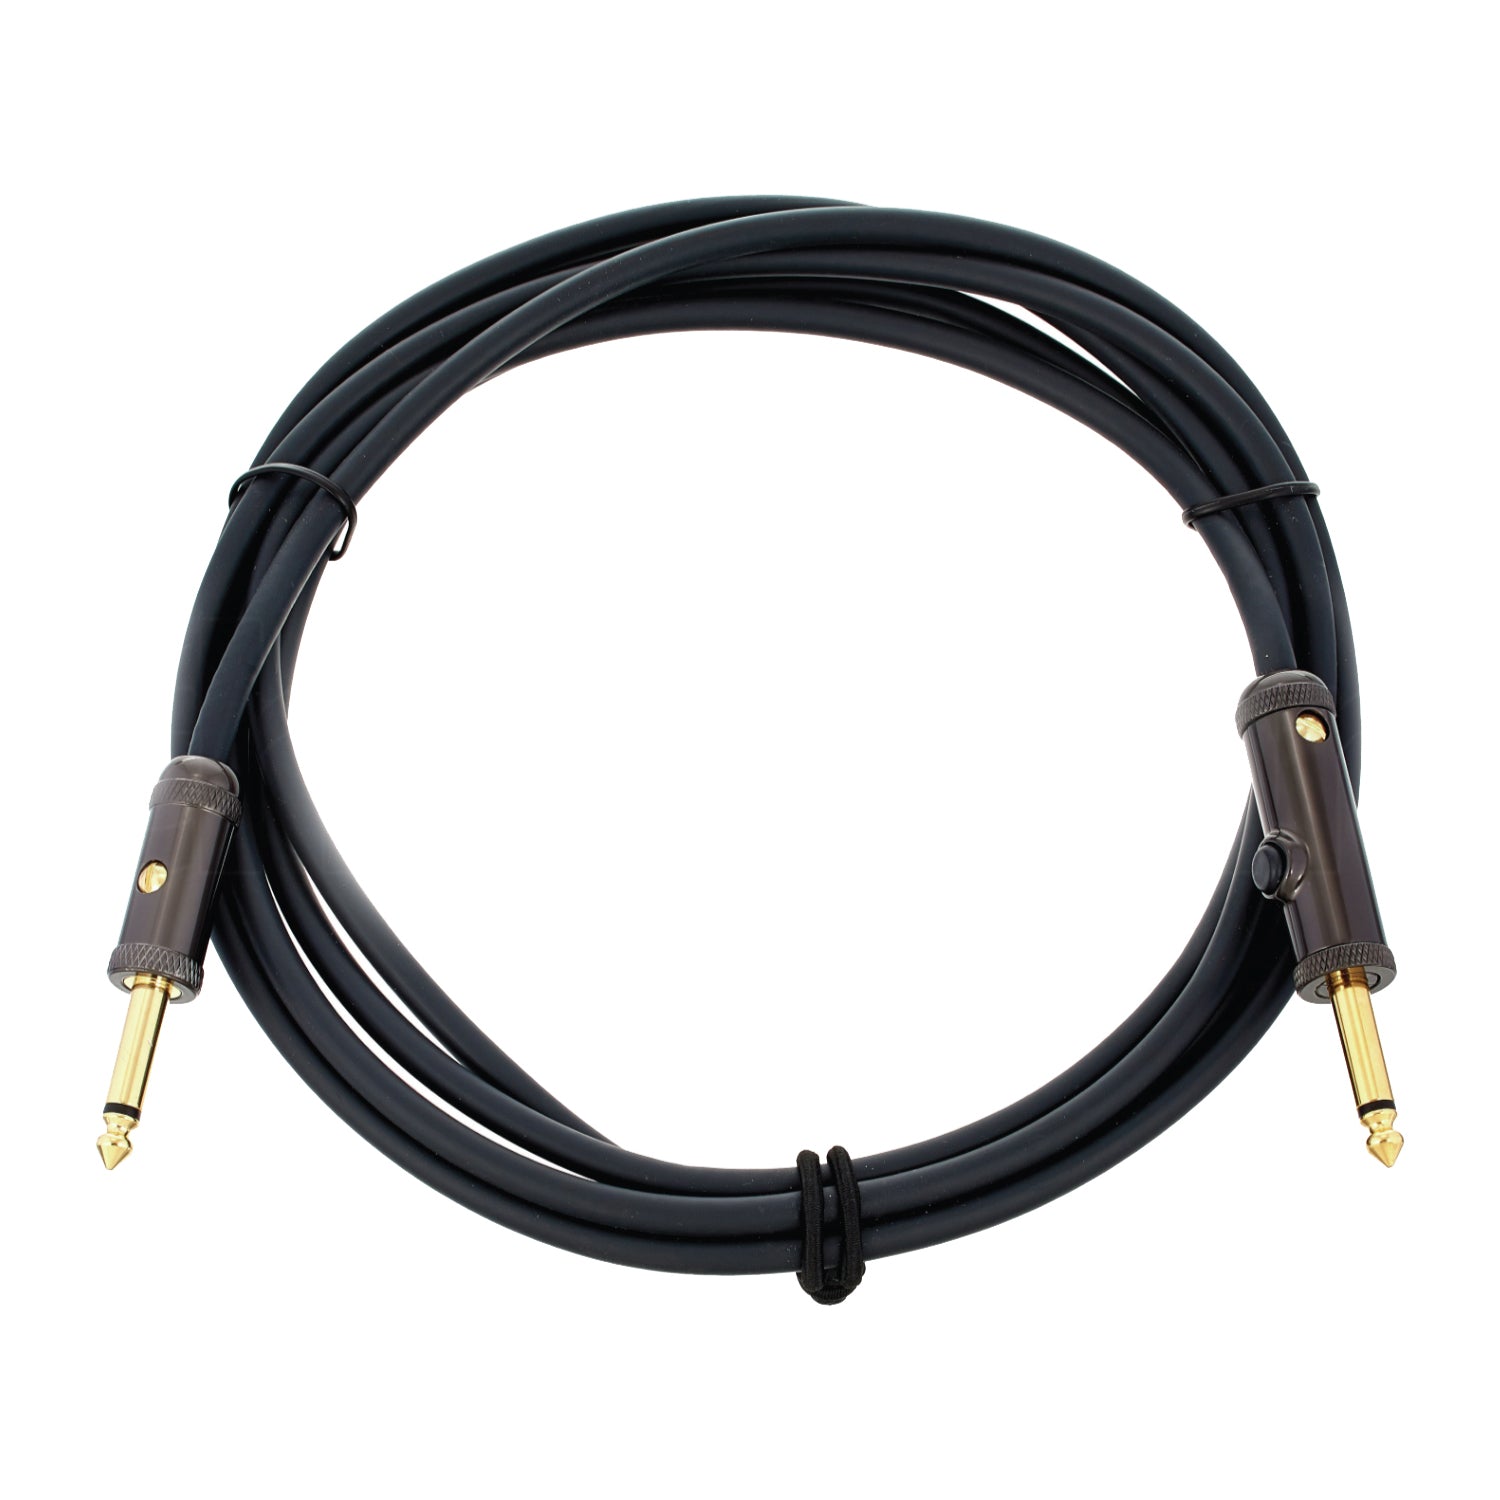 D'ADDARIO Planet Wave PW-AG- (Circuit Breaker Momentary Mute Instrument Cable - 10, 15, 20, 30 feet)